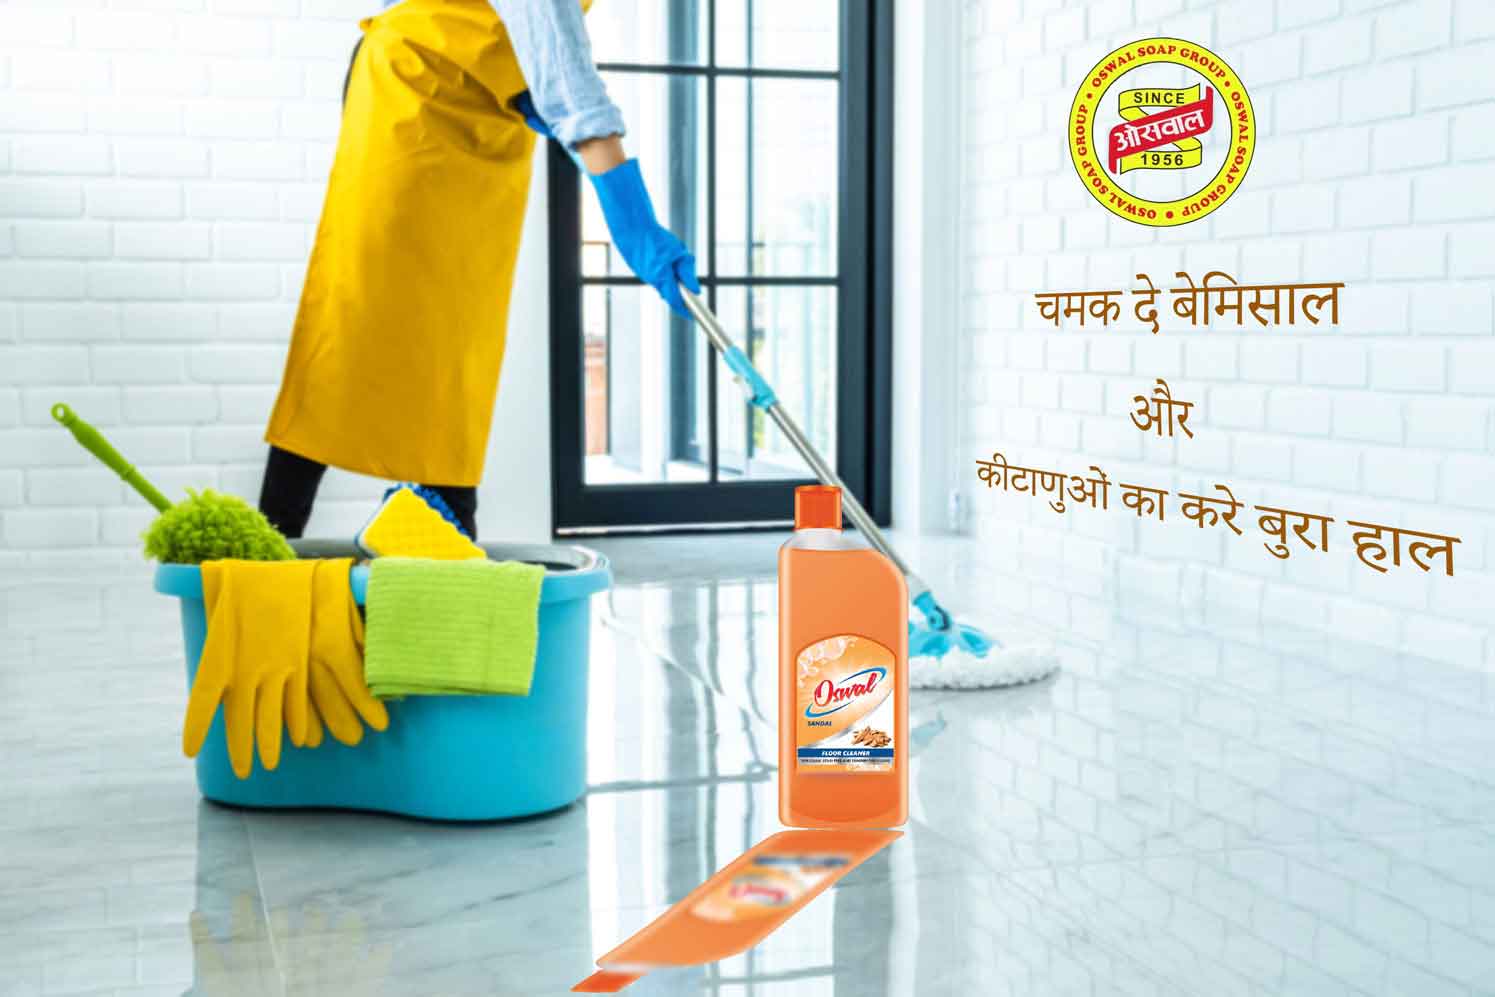 Oswal Floor Cleaner